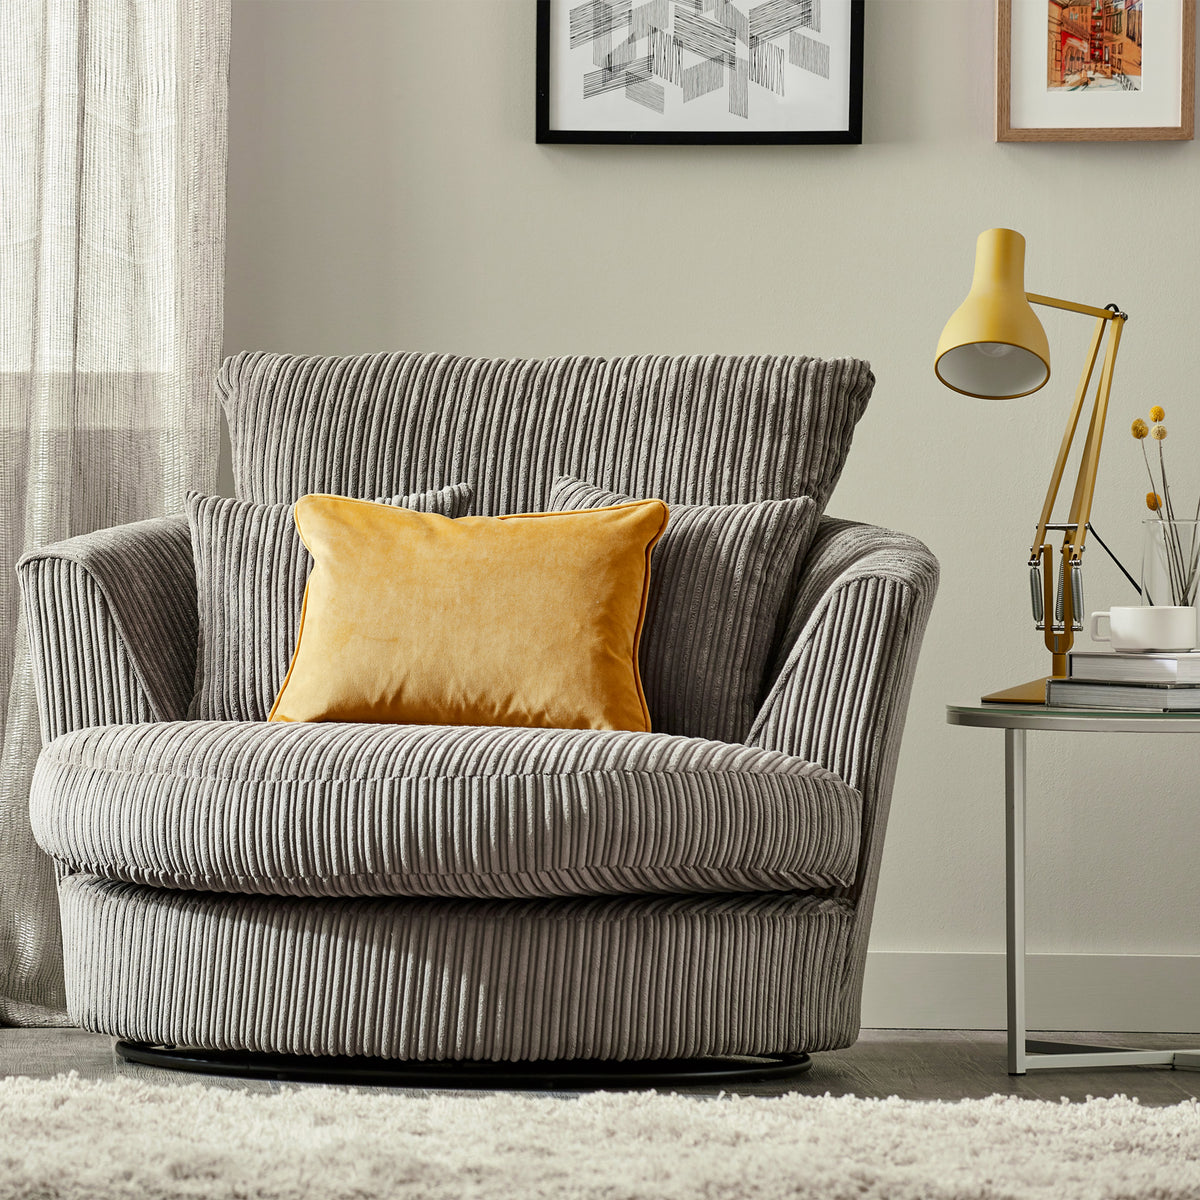 Bletchley Charcoal Jumbo Cord Swivel Chair for living room